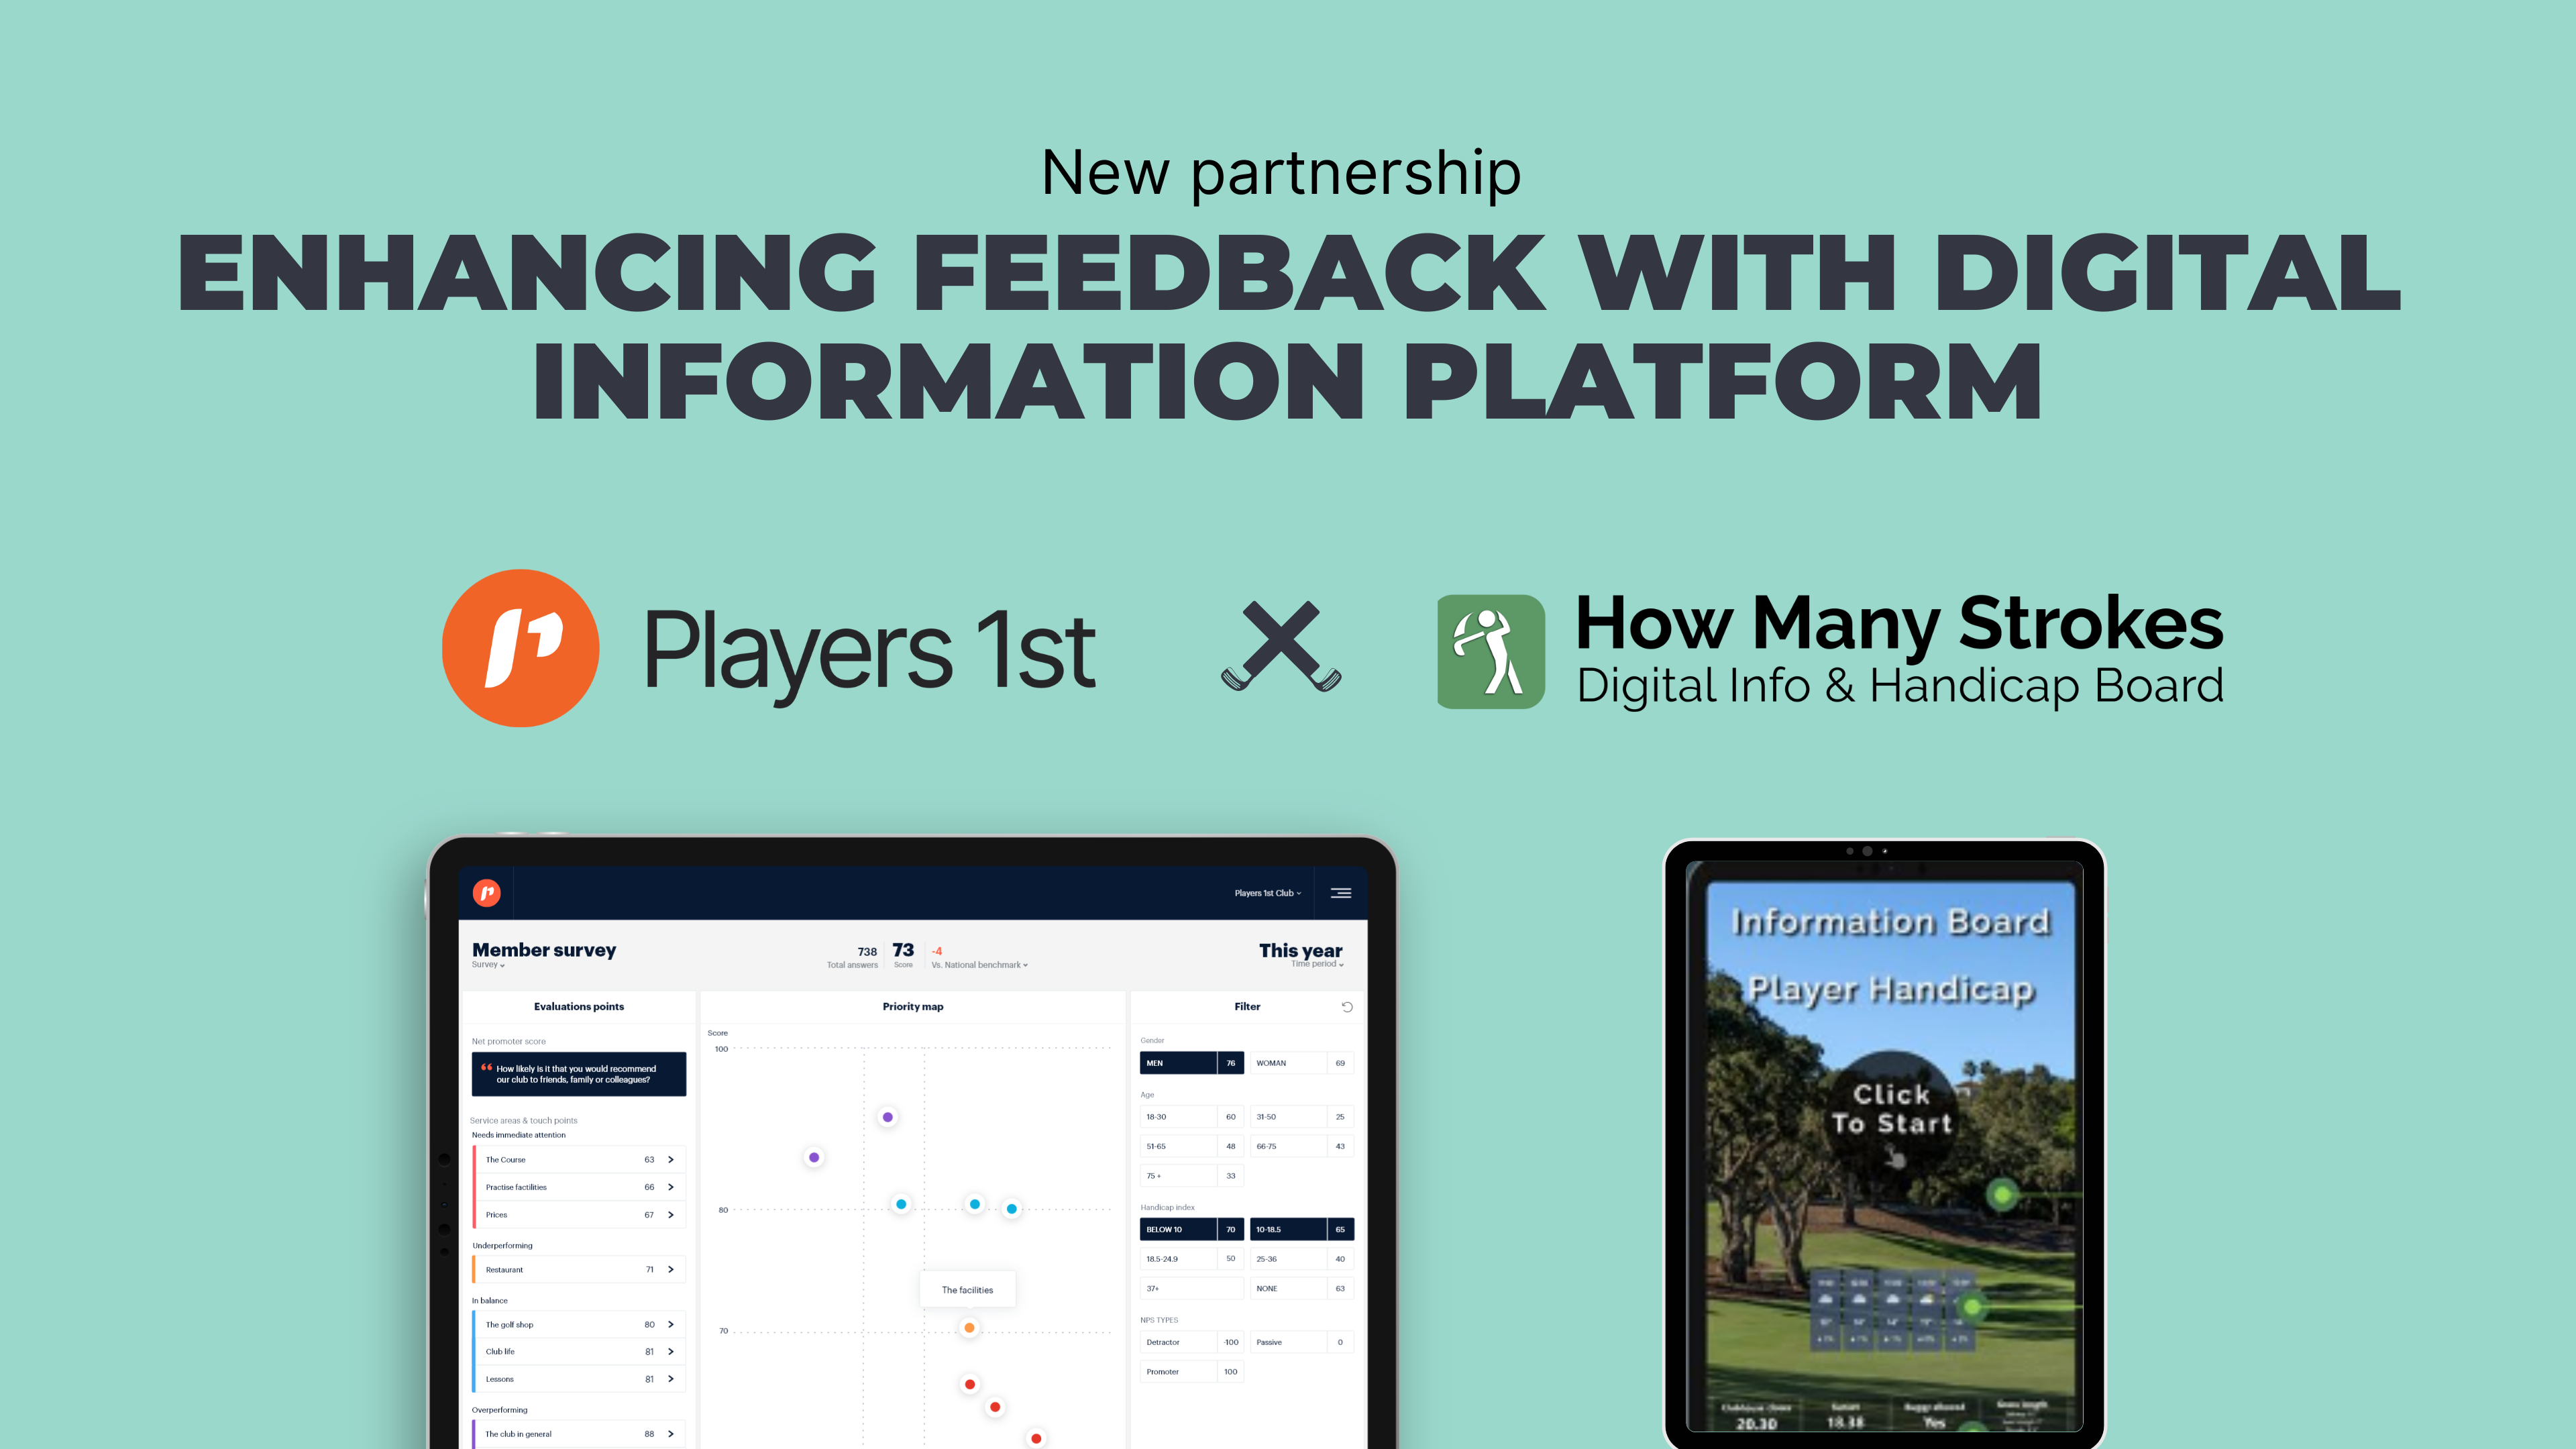 Players 1st and How Many Strokes partner to enhance feedback with digital information platform - Cover image.